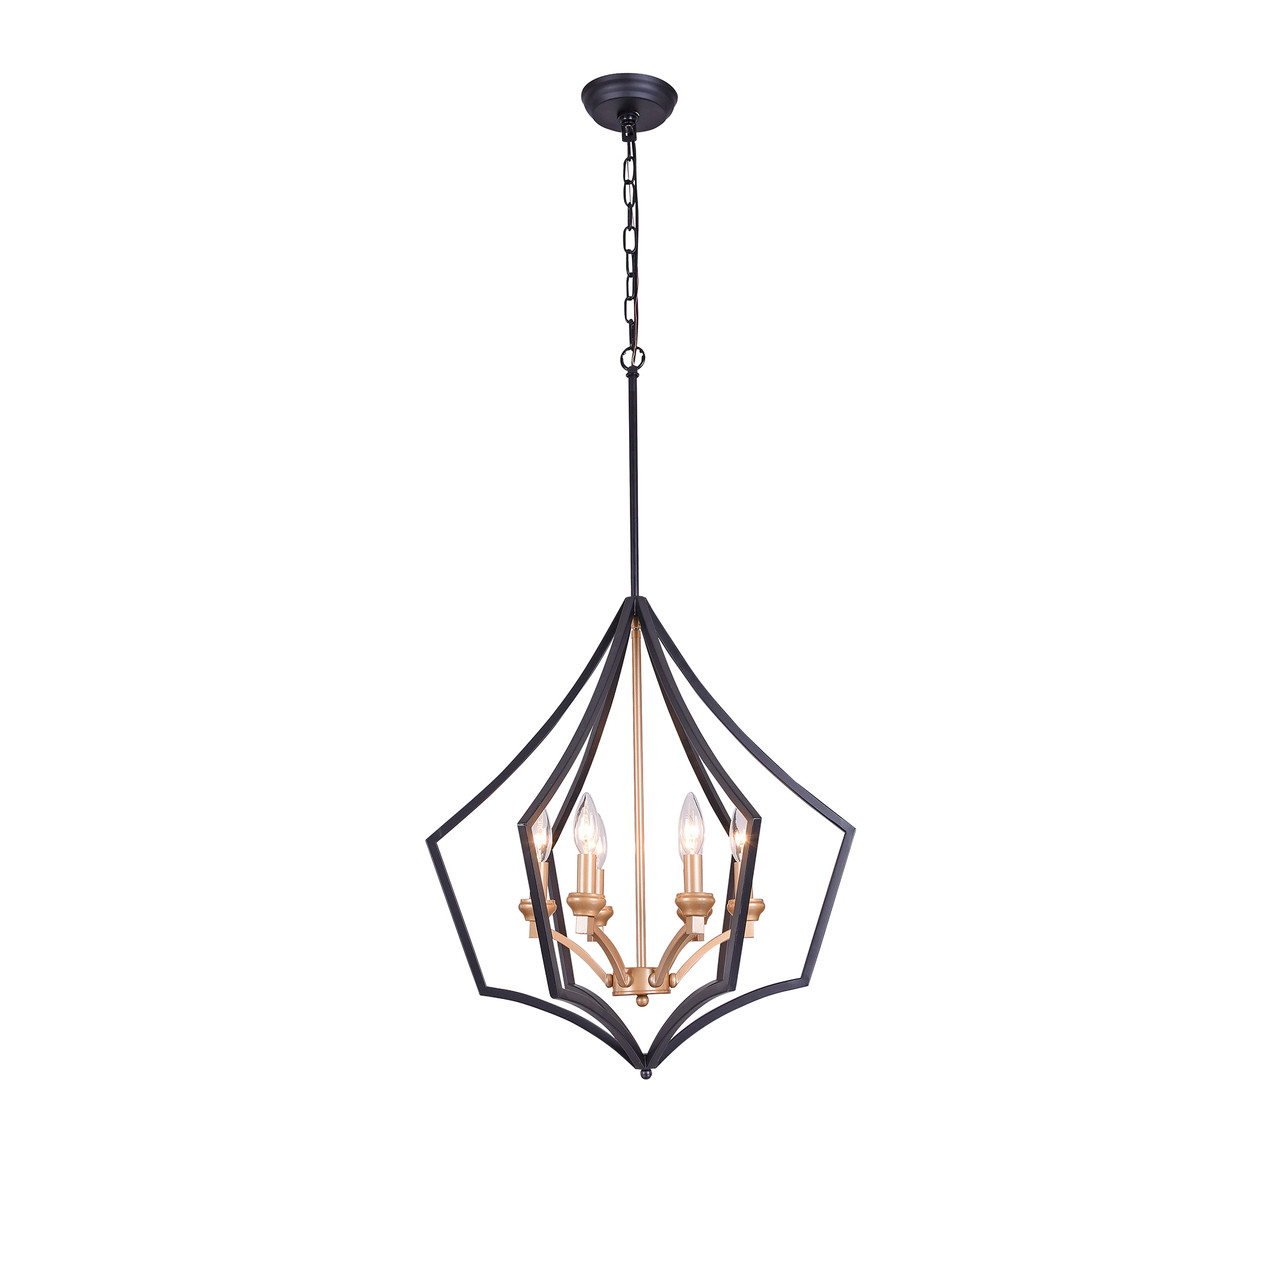 WAREHOUSE OF TIFFANY'S P2015/6 Freine 21 in. 6-Light Indoor Gold and Black Finish Chandelier with Light Kit